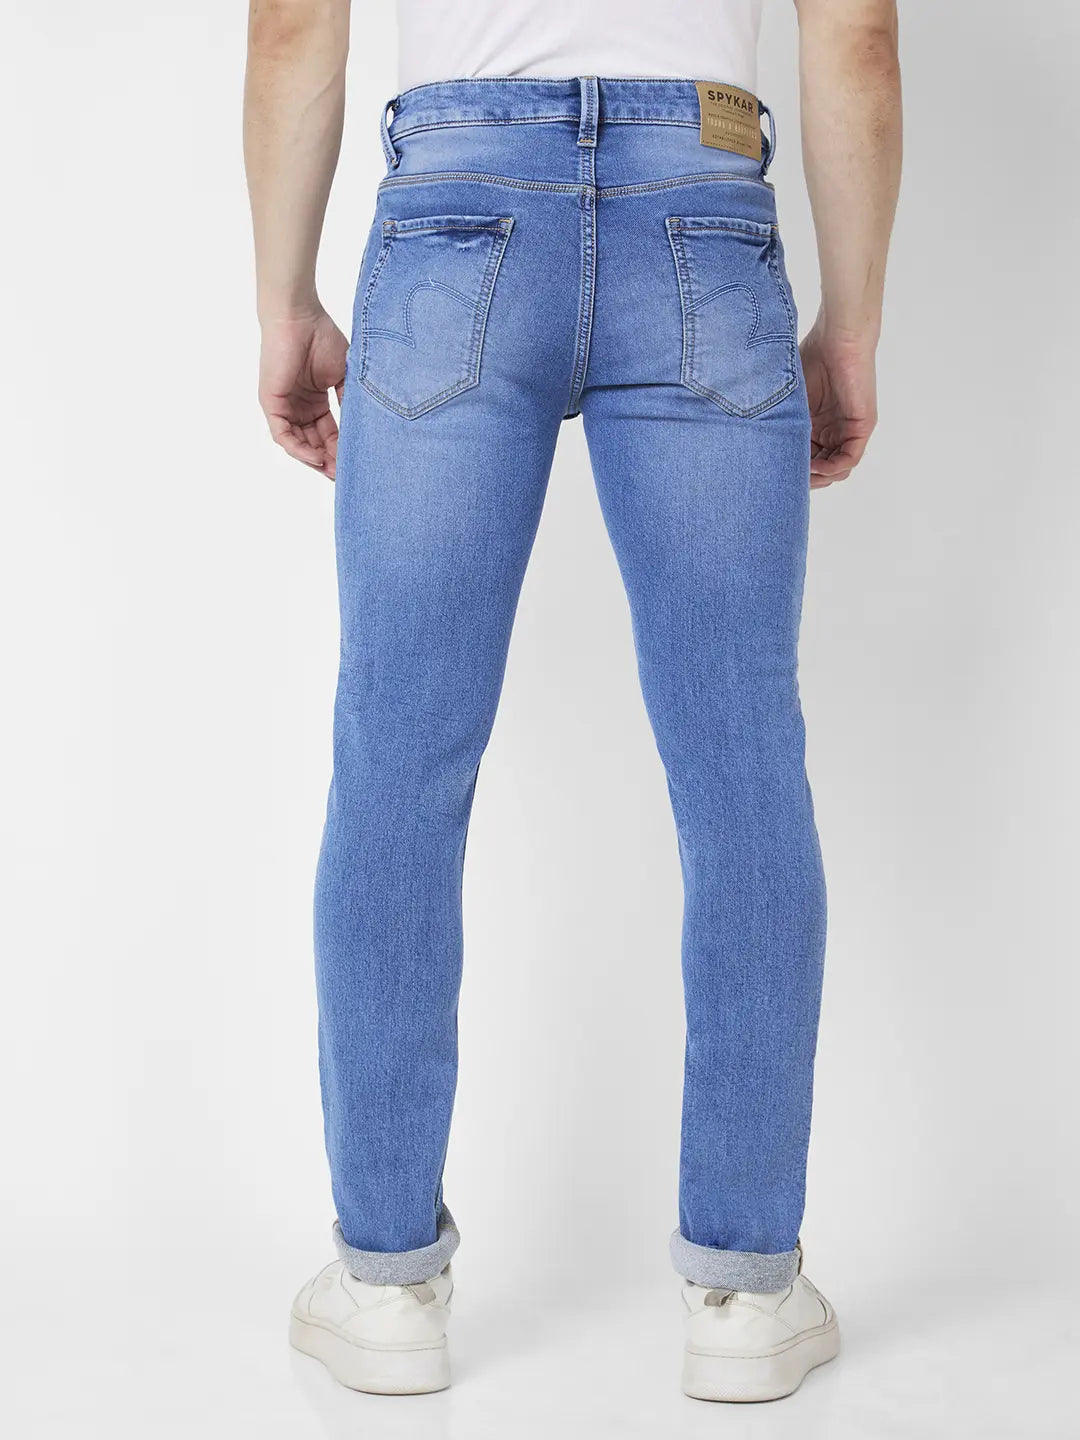 Spykar Blue Super Skinny Fit Low Rise Clean Look Stretchable Jeans  8248359.htm - Buy Spykar Blue Super Skinny Fit Low Rise Clean Look  Stretchable Jeans 8248359.htm online in India